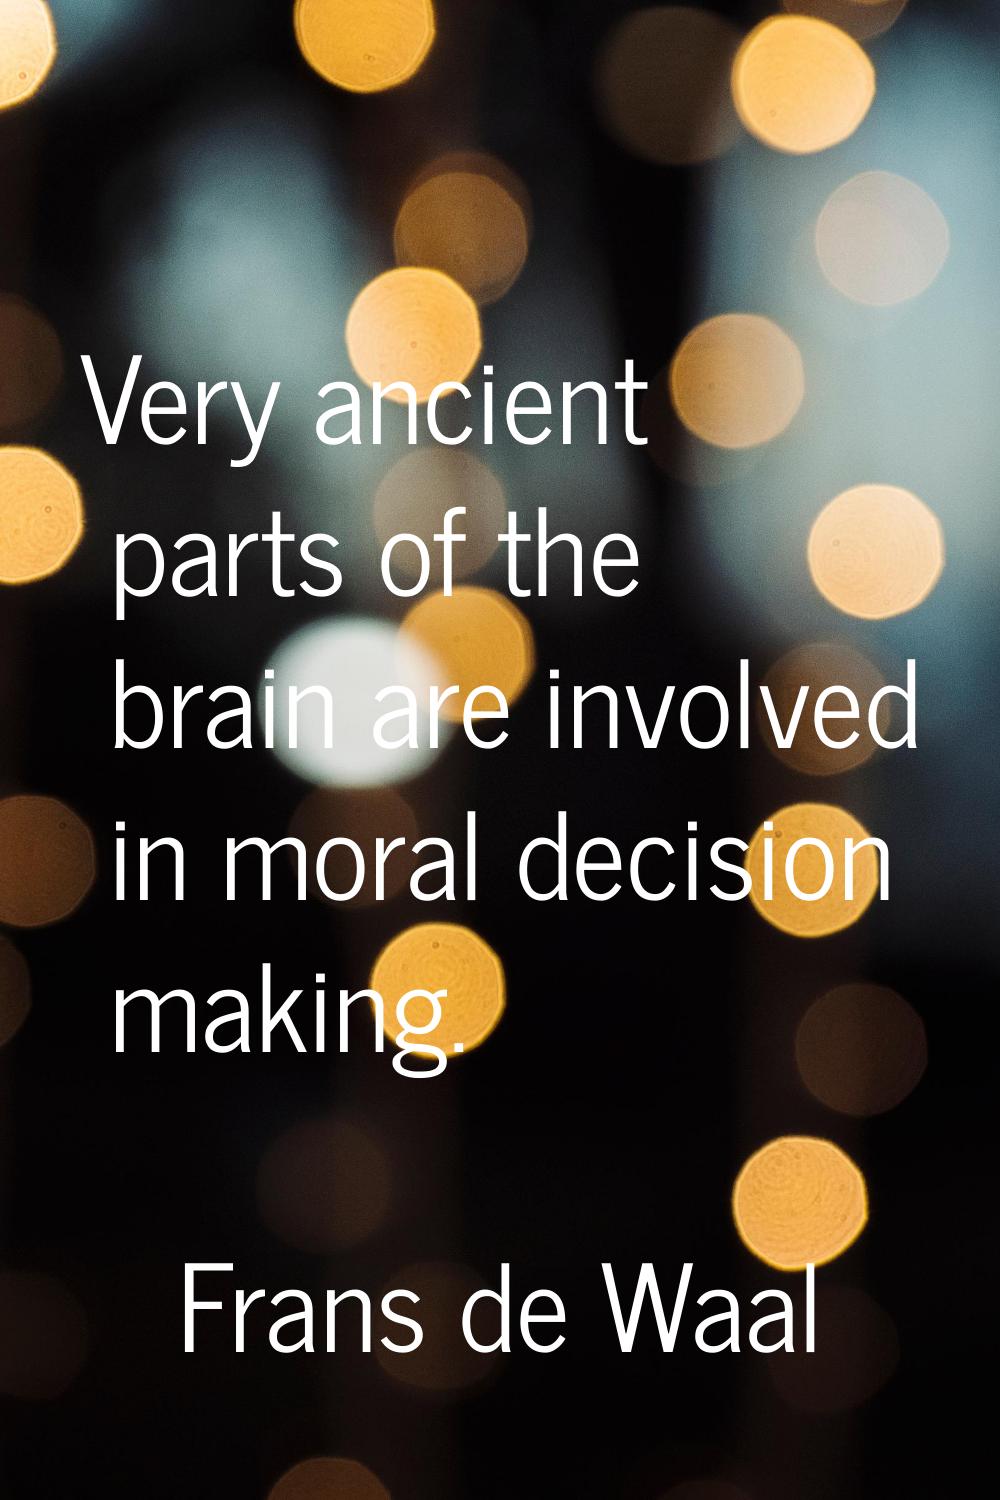 Very ancient parts of the brain are involved in moral decision making.